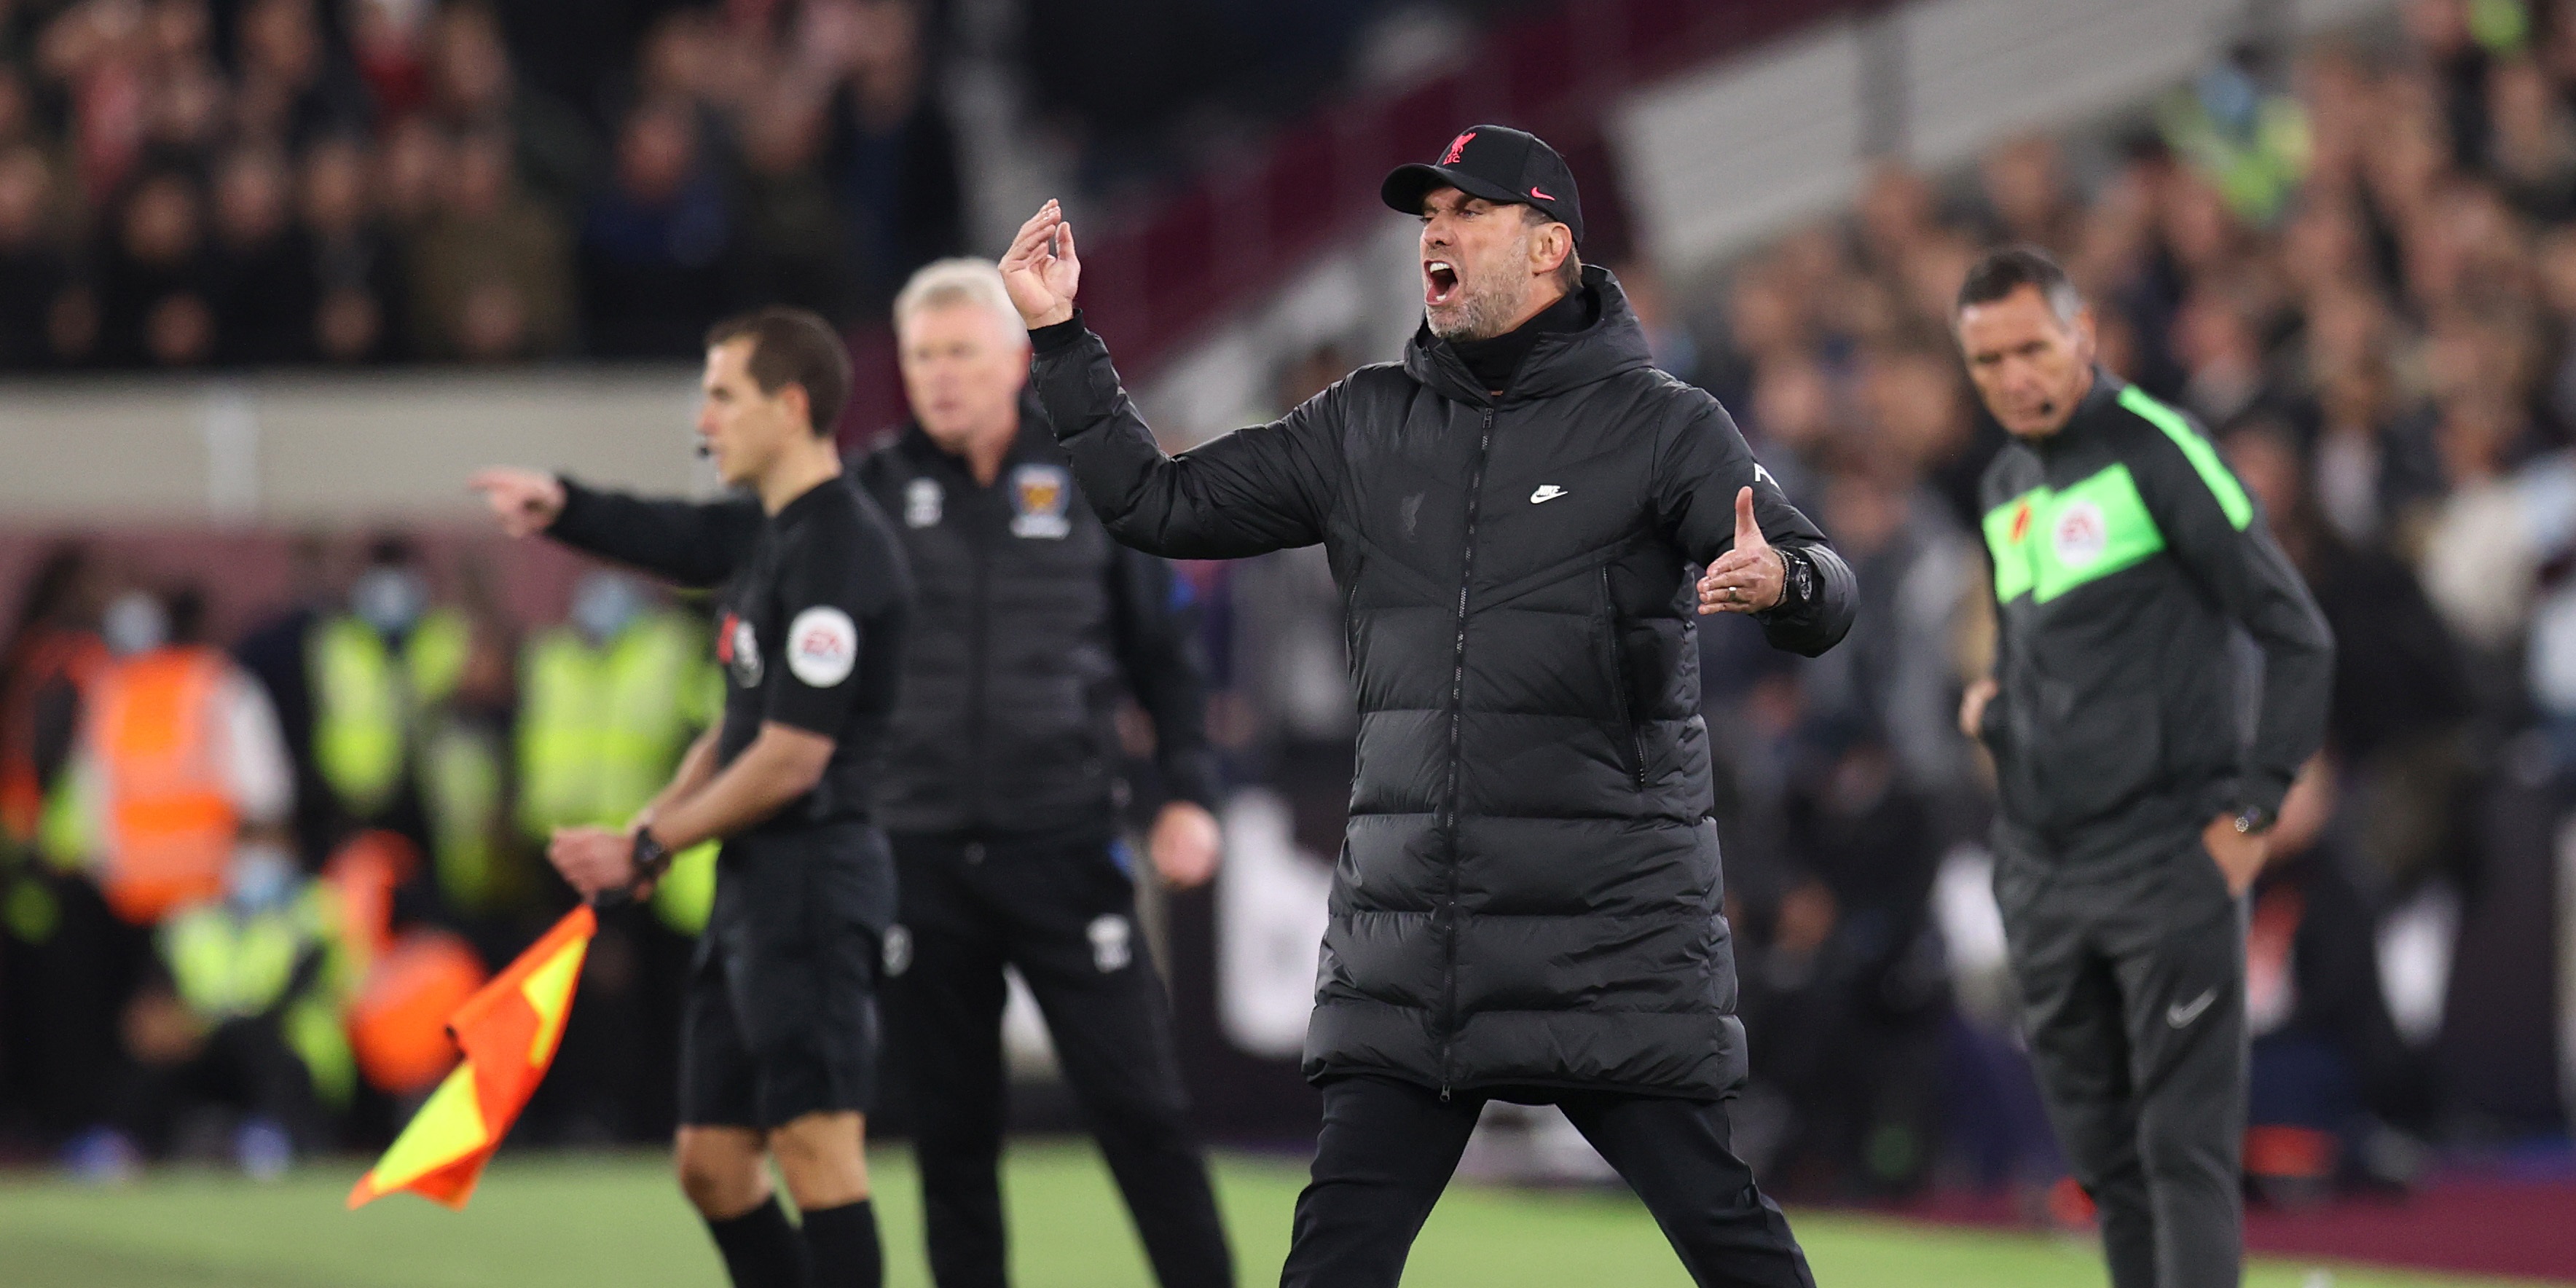 ‘Klopp is right’ – Ex-refereeing chief backs Liverpool boss over contentious call & explains why he once drove to meet Benitez